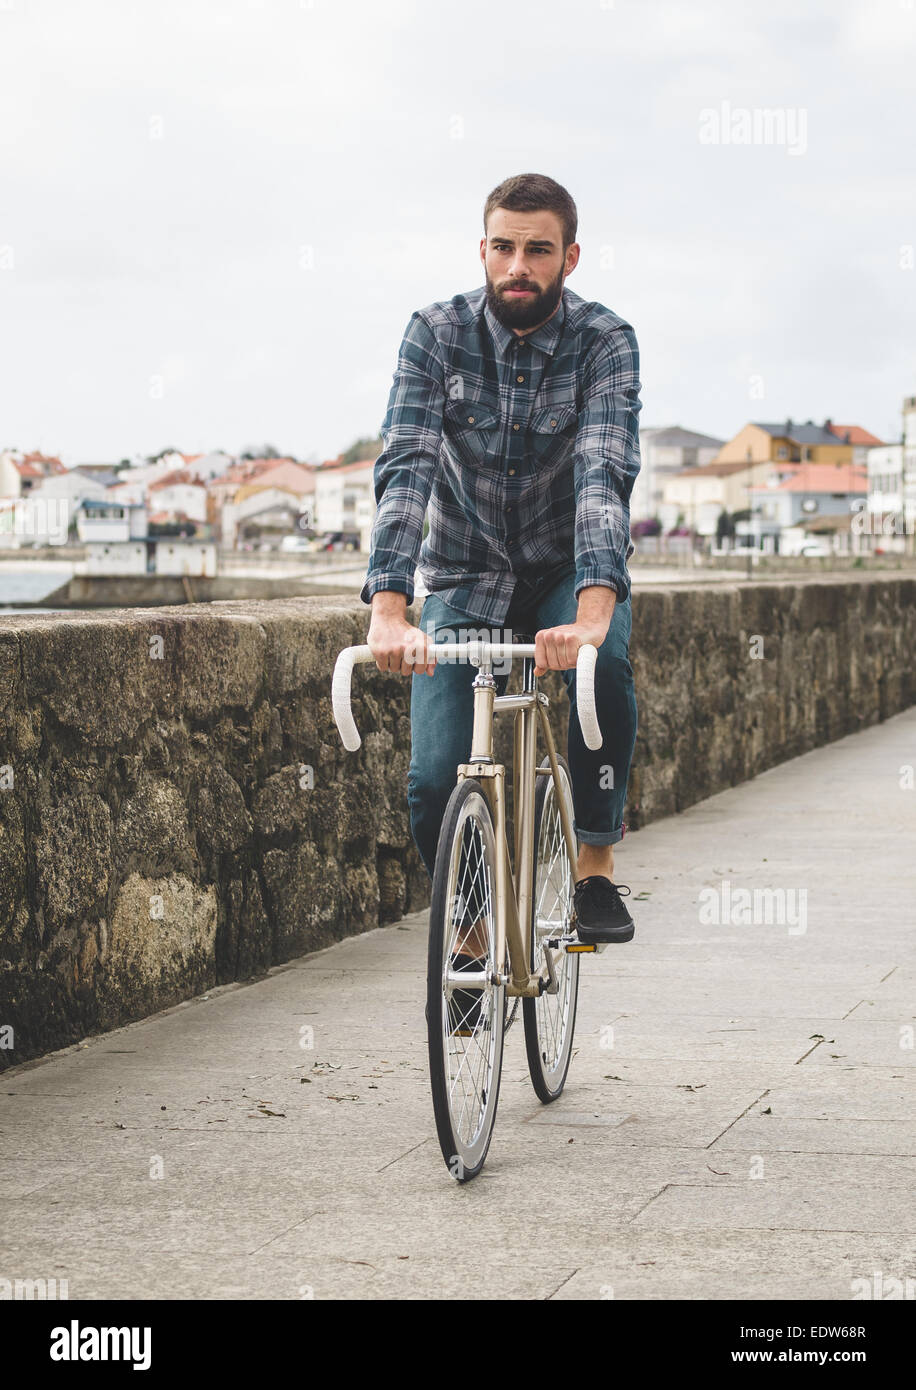 Hipster man riding in a fixie bike in the city. Stock Photo